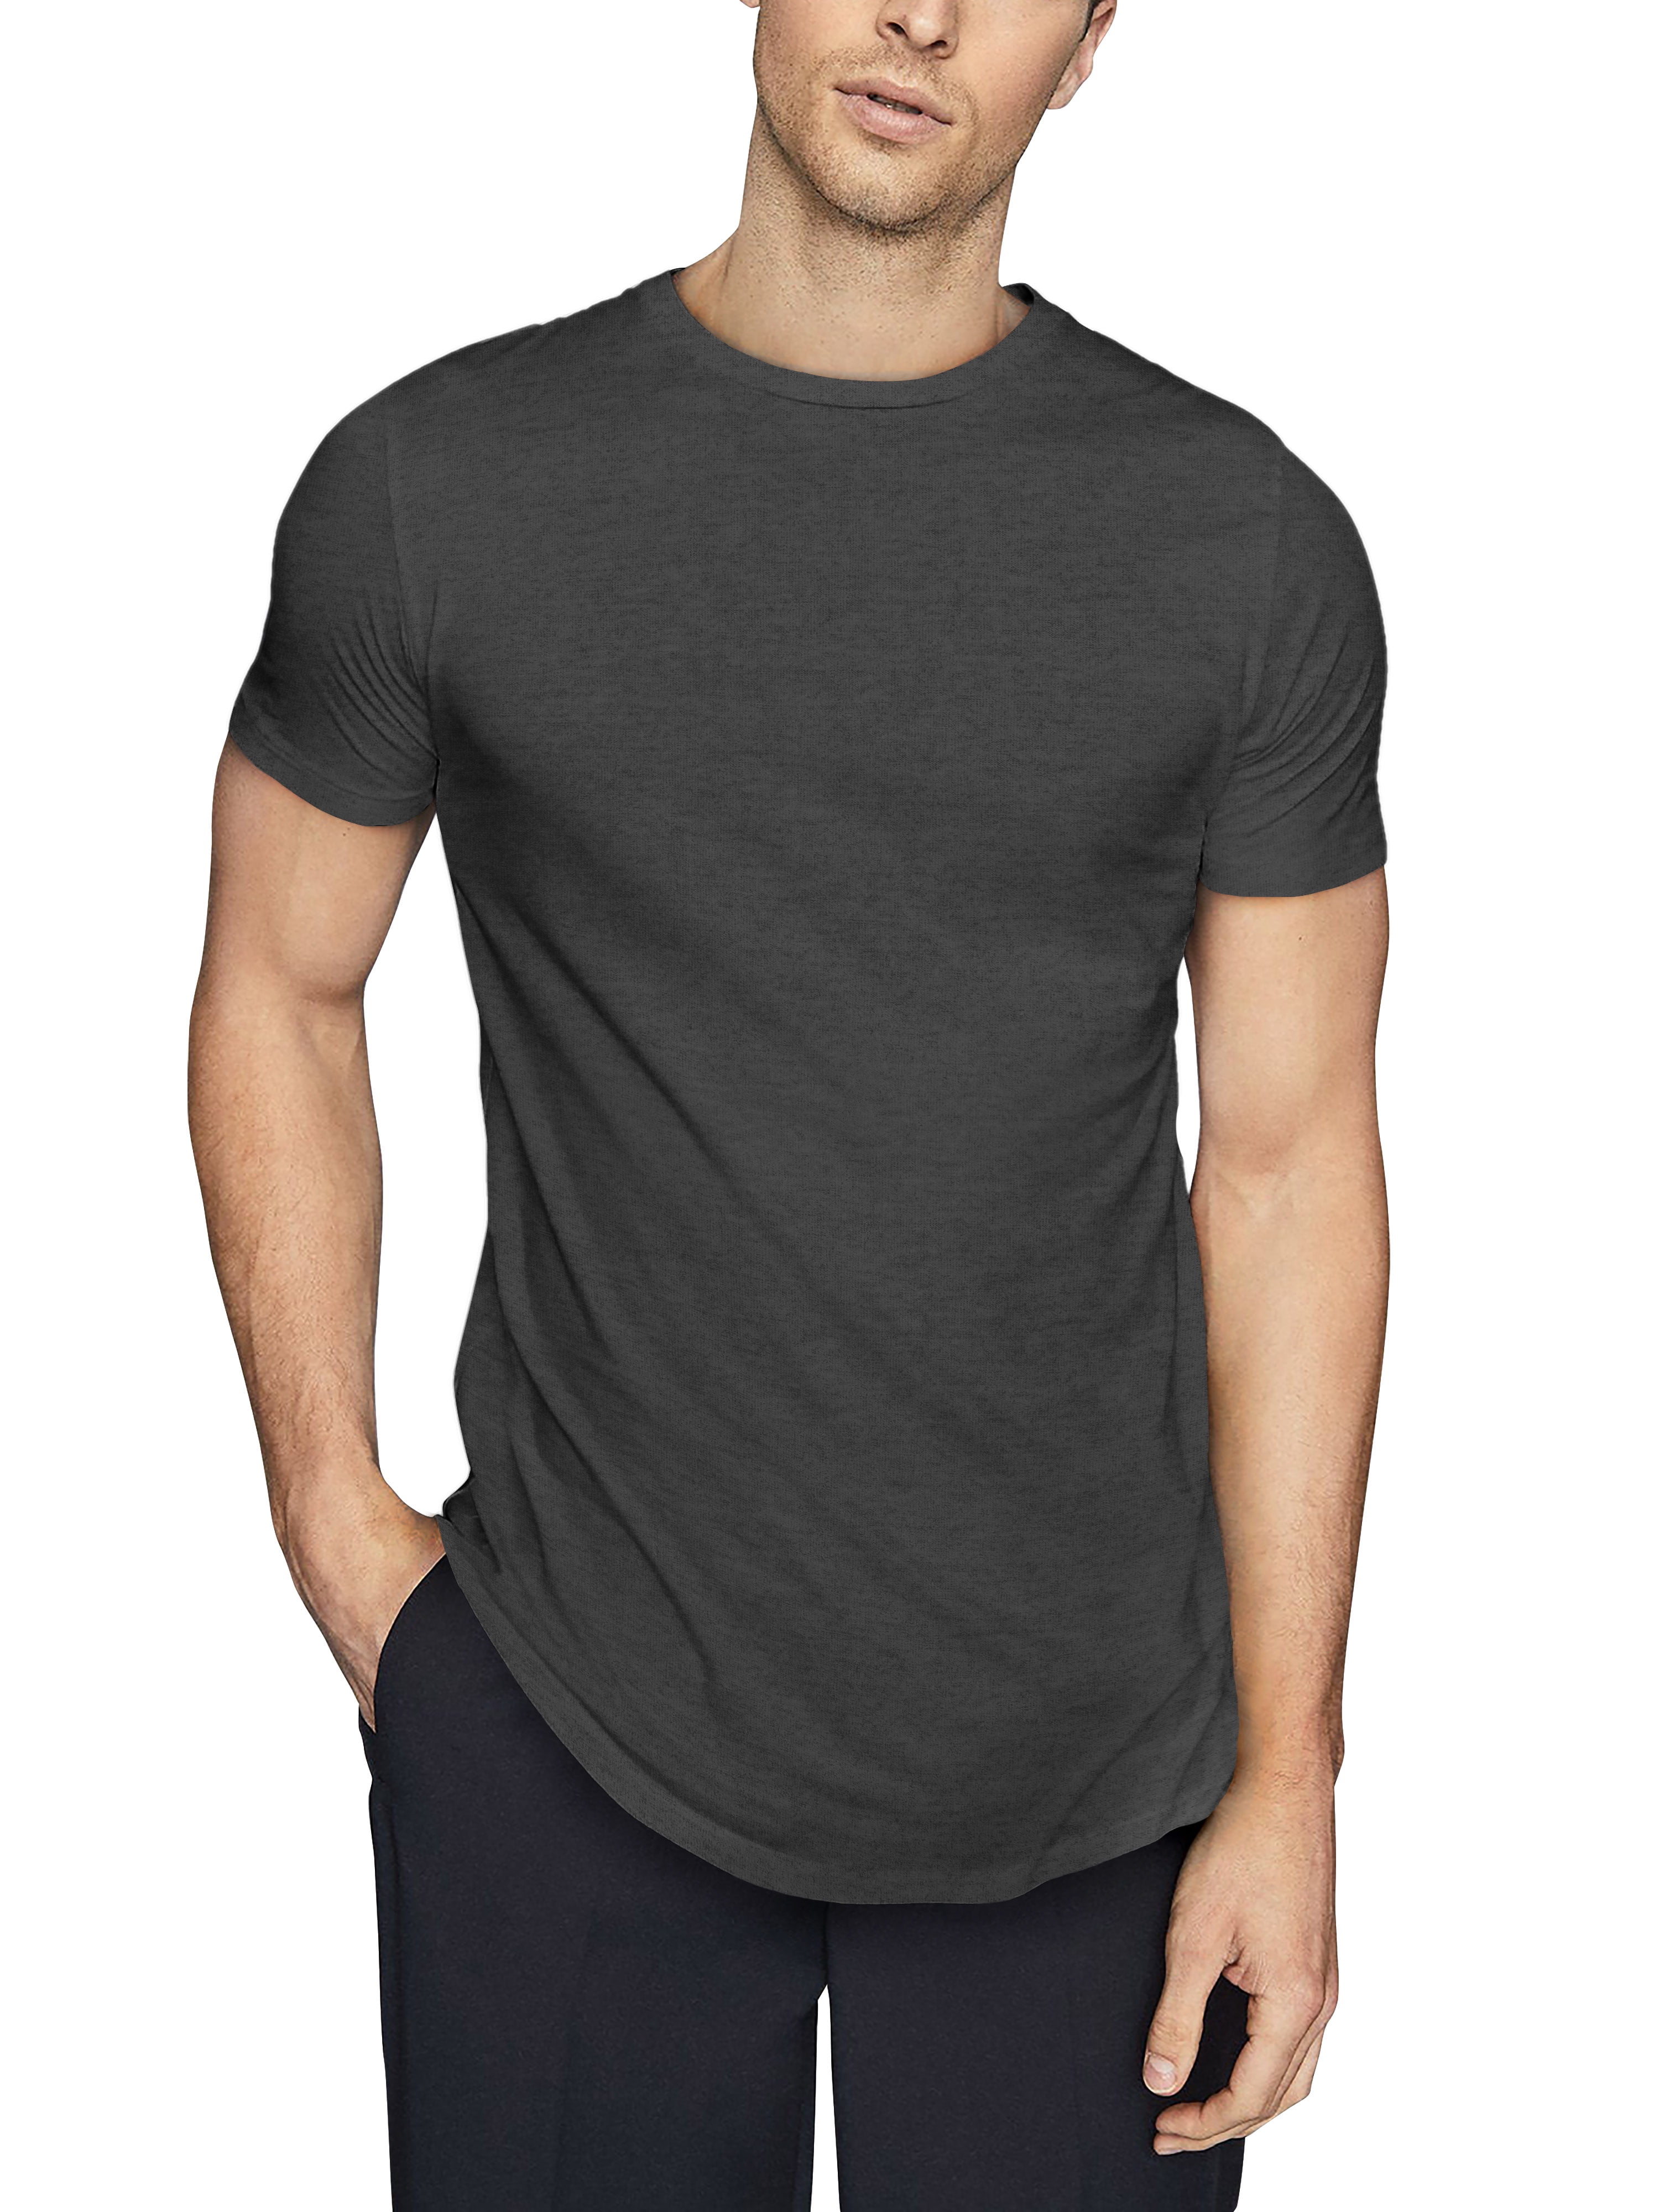 Male Tops Mens Fitness Pocket Blouse T shirt Hip Hop Casual Stylish Slim Fit 